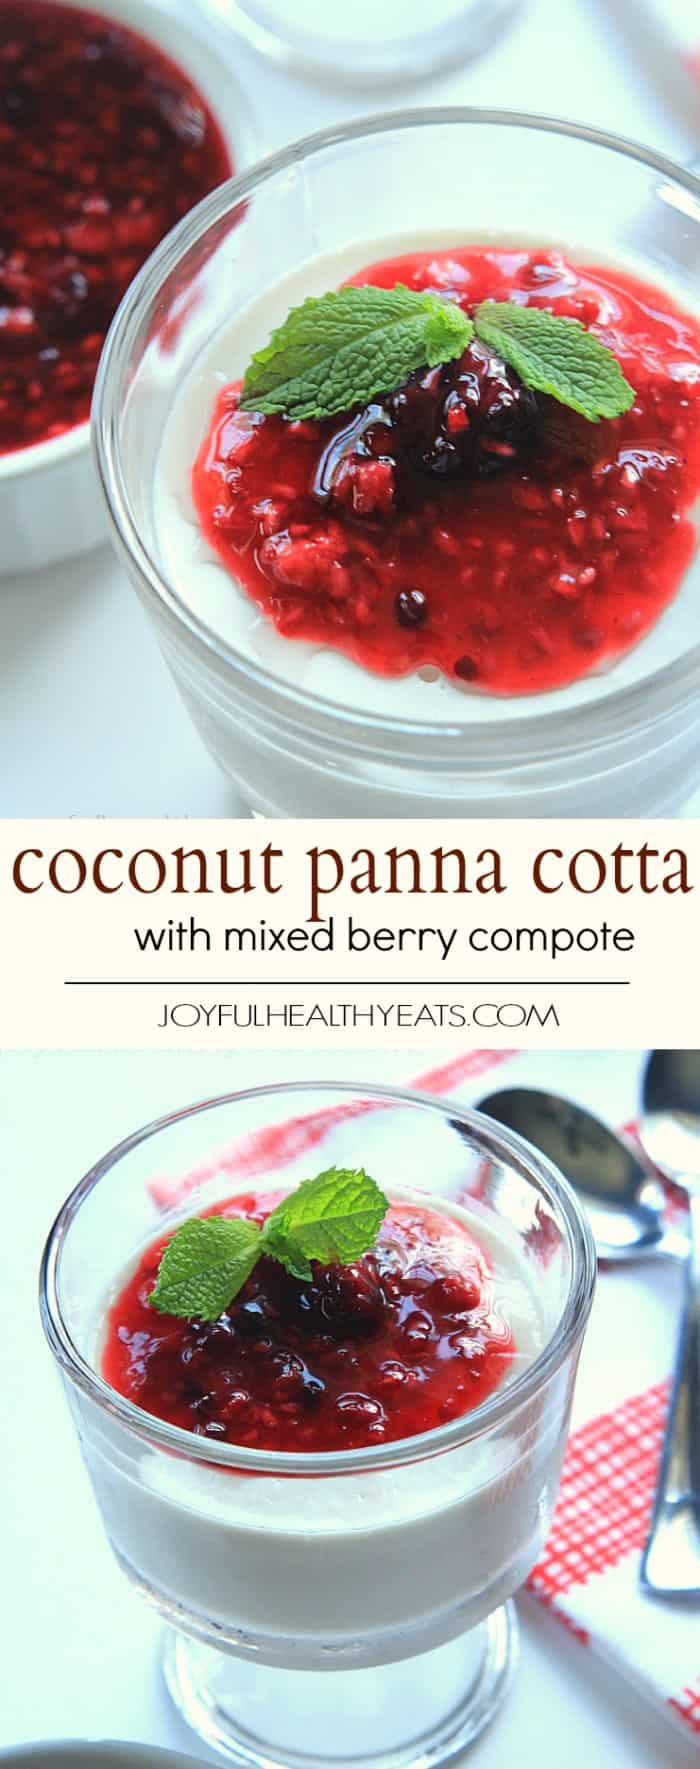 Pinterest collage for Coconut Panna Cotta with Mixed Berry Compote recipe